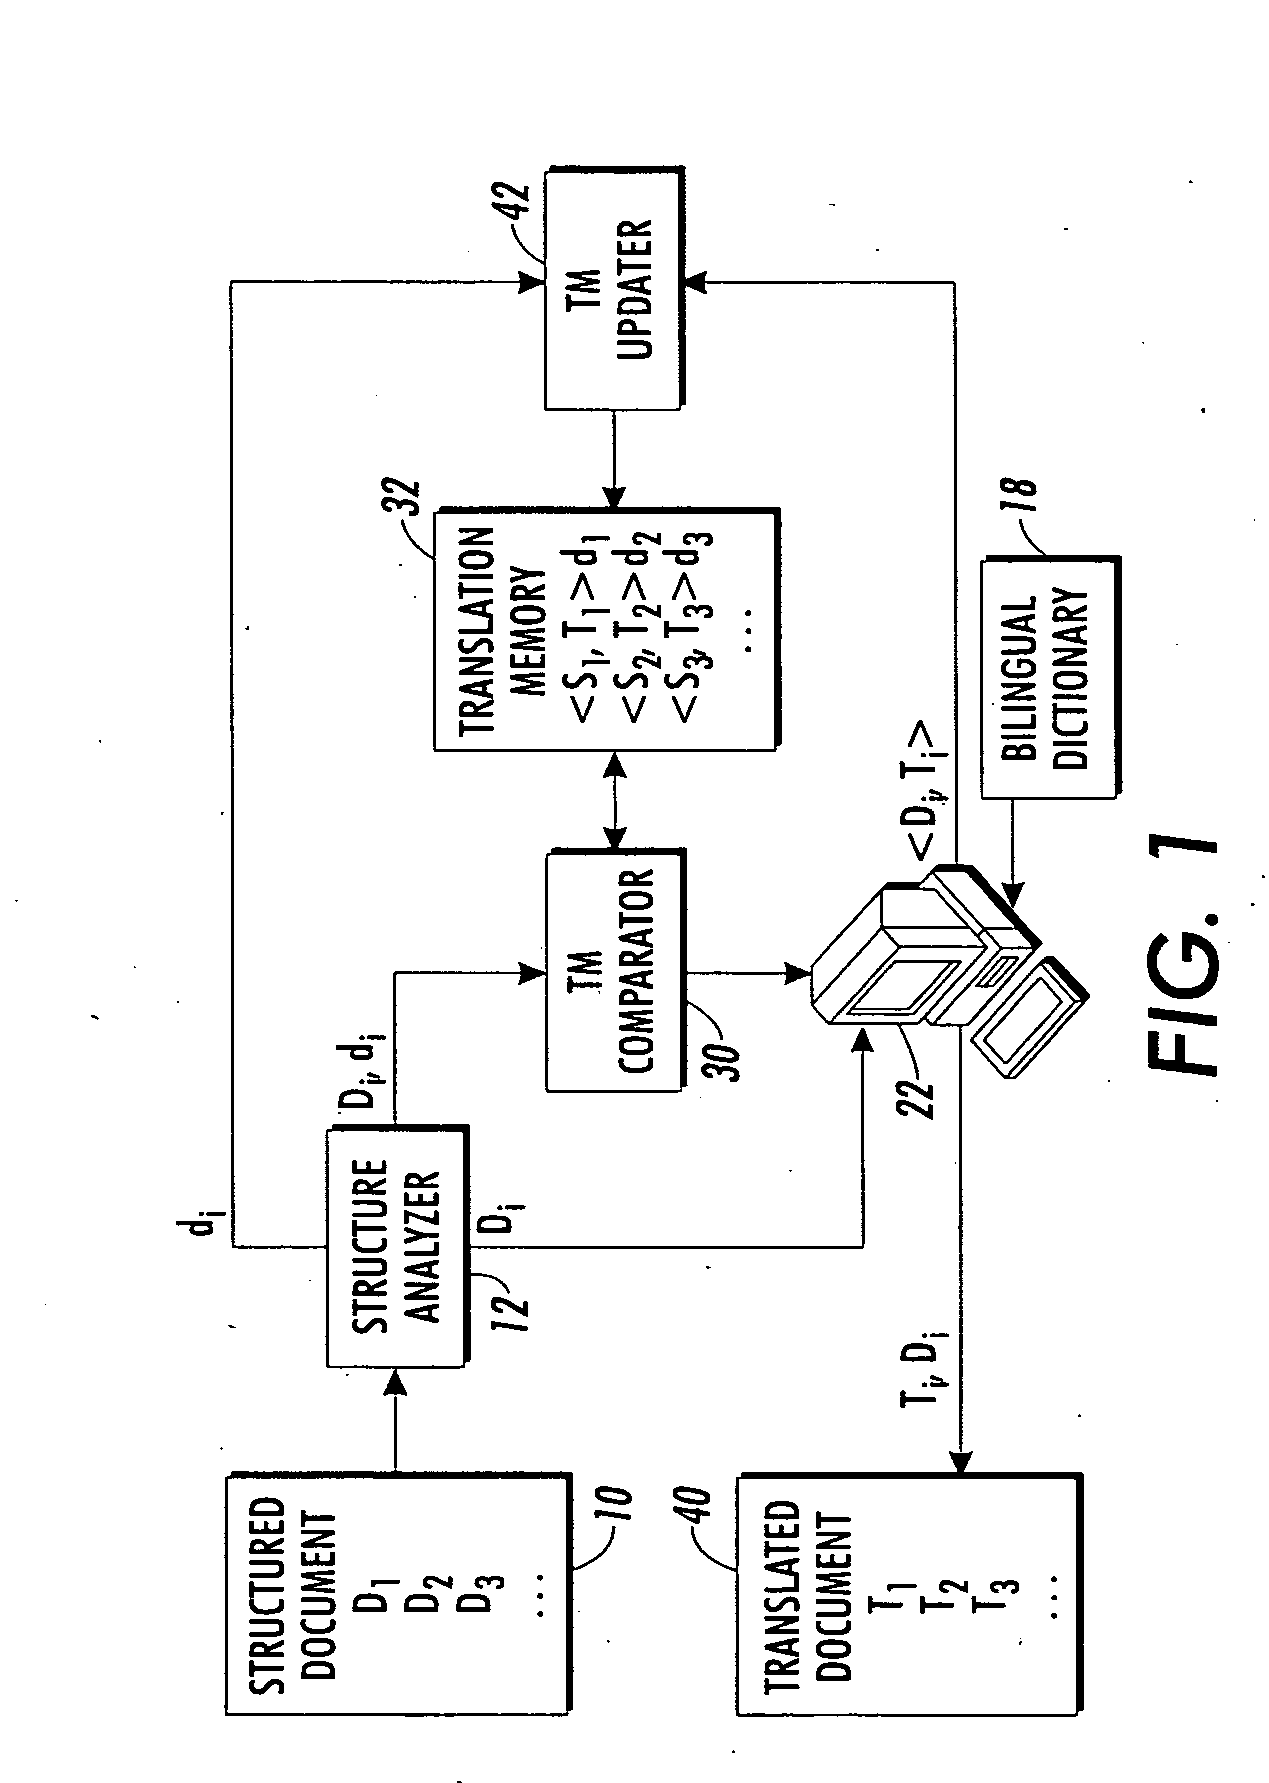 Retrieval method for translation memories containing highly structured documents